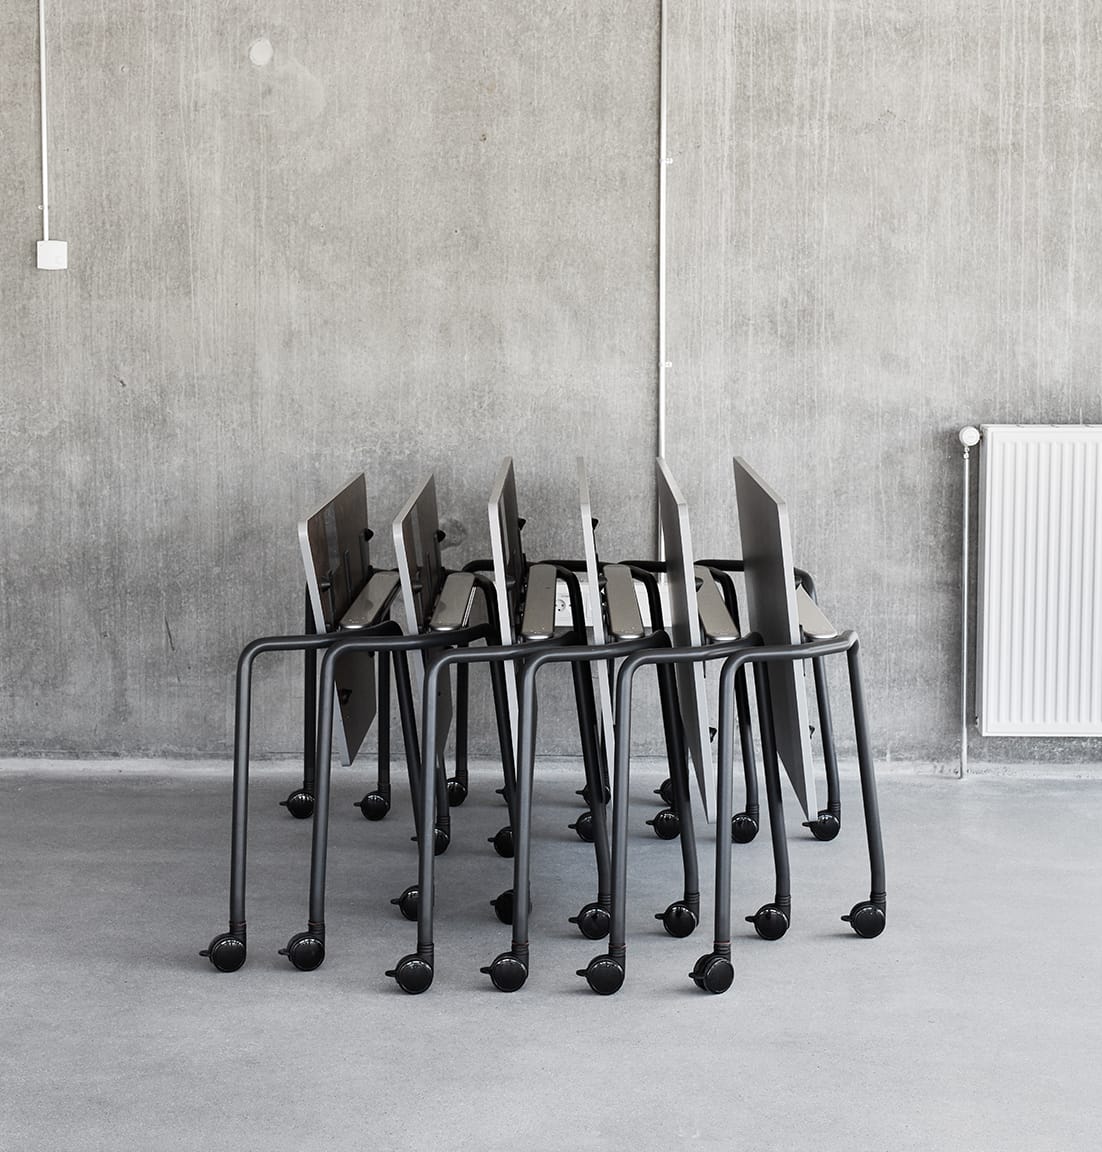 A group of folded tables on wheels in a concrete room.